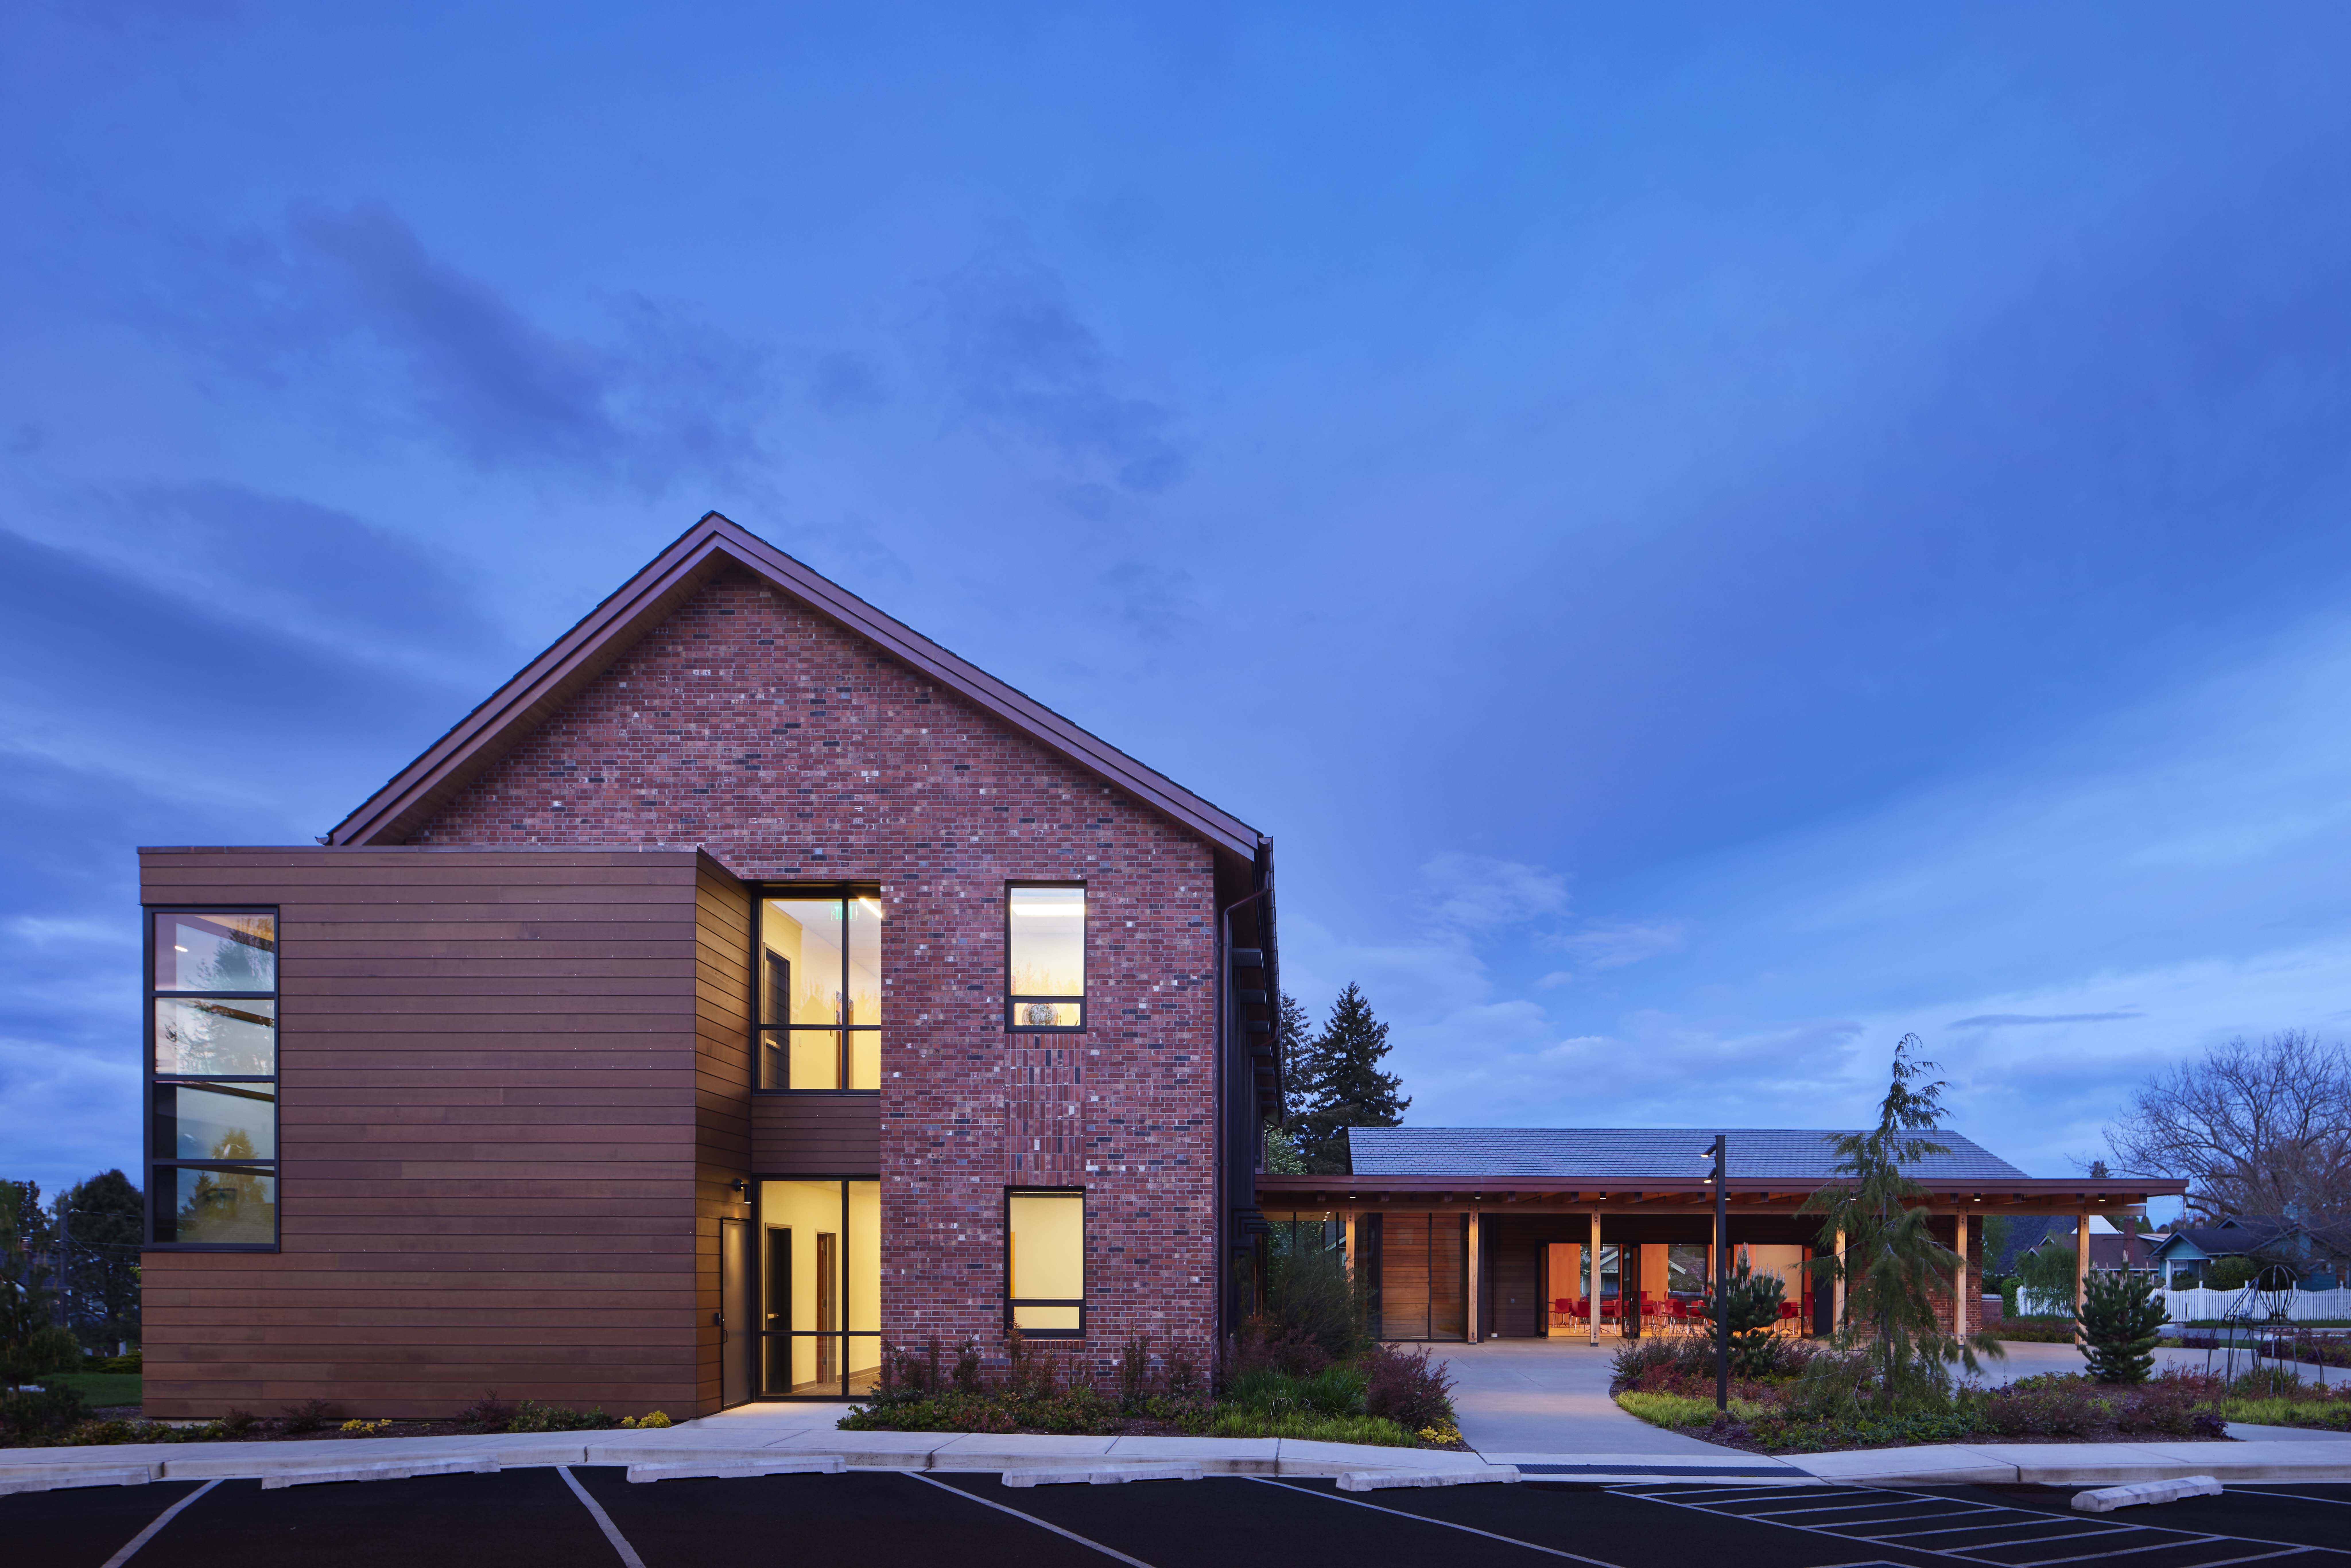 University of Puget Sound | Maximizing Daylight with Understated Interior Lighting and Design